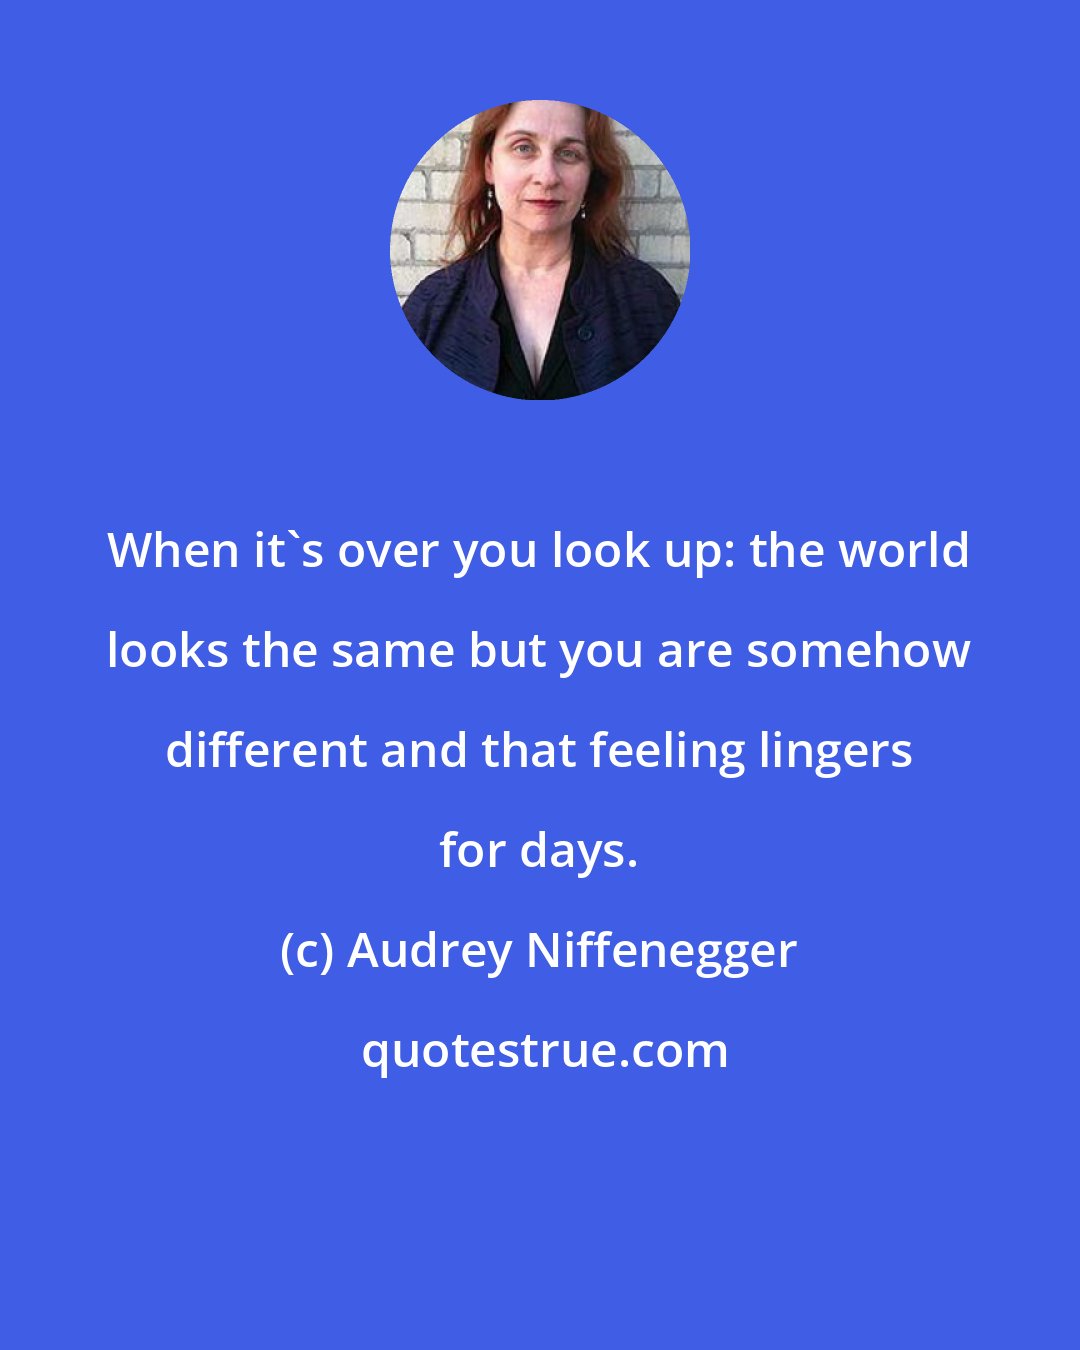 Audrey Niffenegger: When it's over you look up: the world looks the same but you are somehow different and that feeling lingers for days.